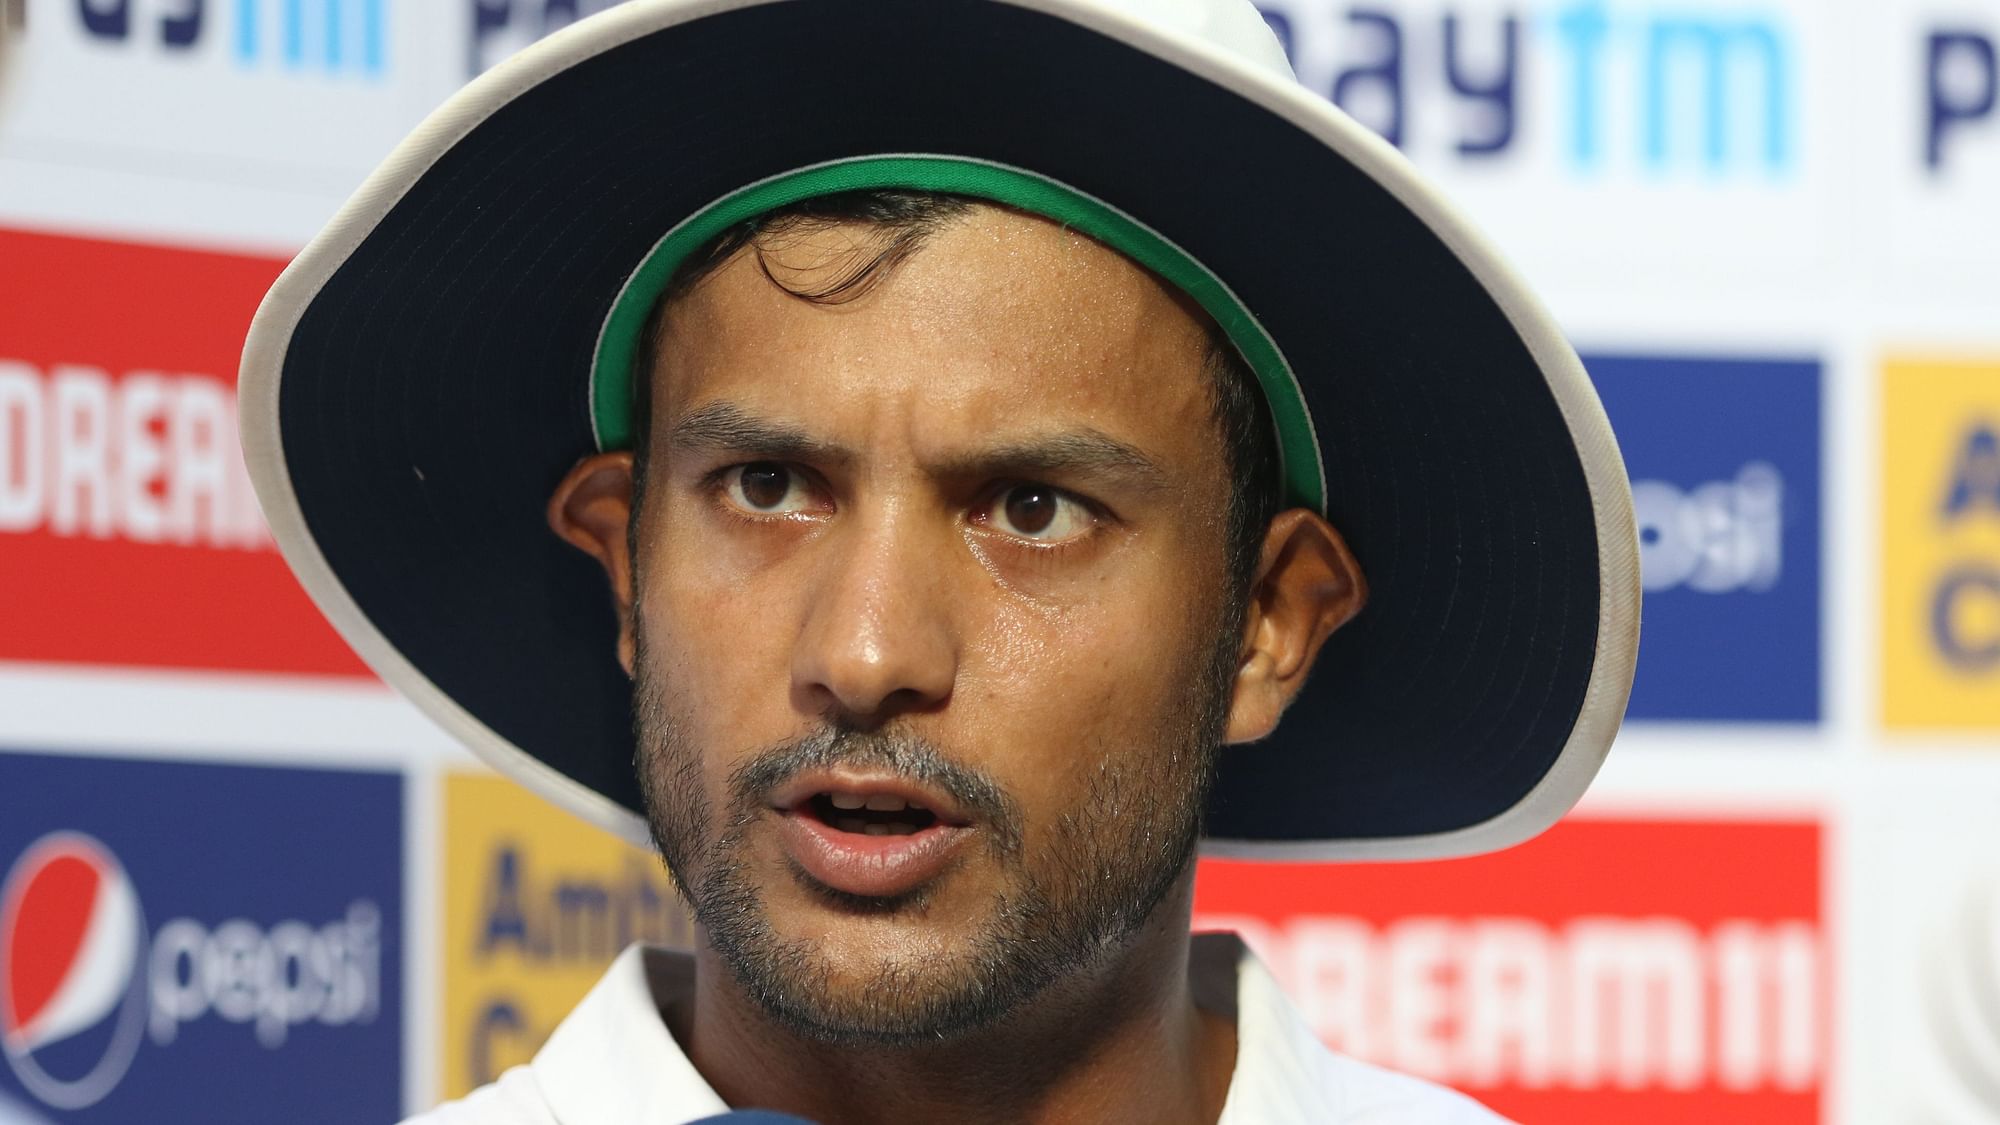 Mayank Agarwal speaks after scoring his maiden double century, against South Africa.